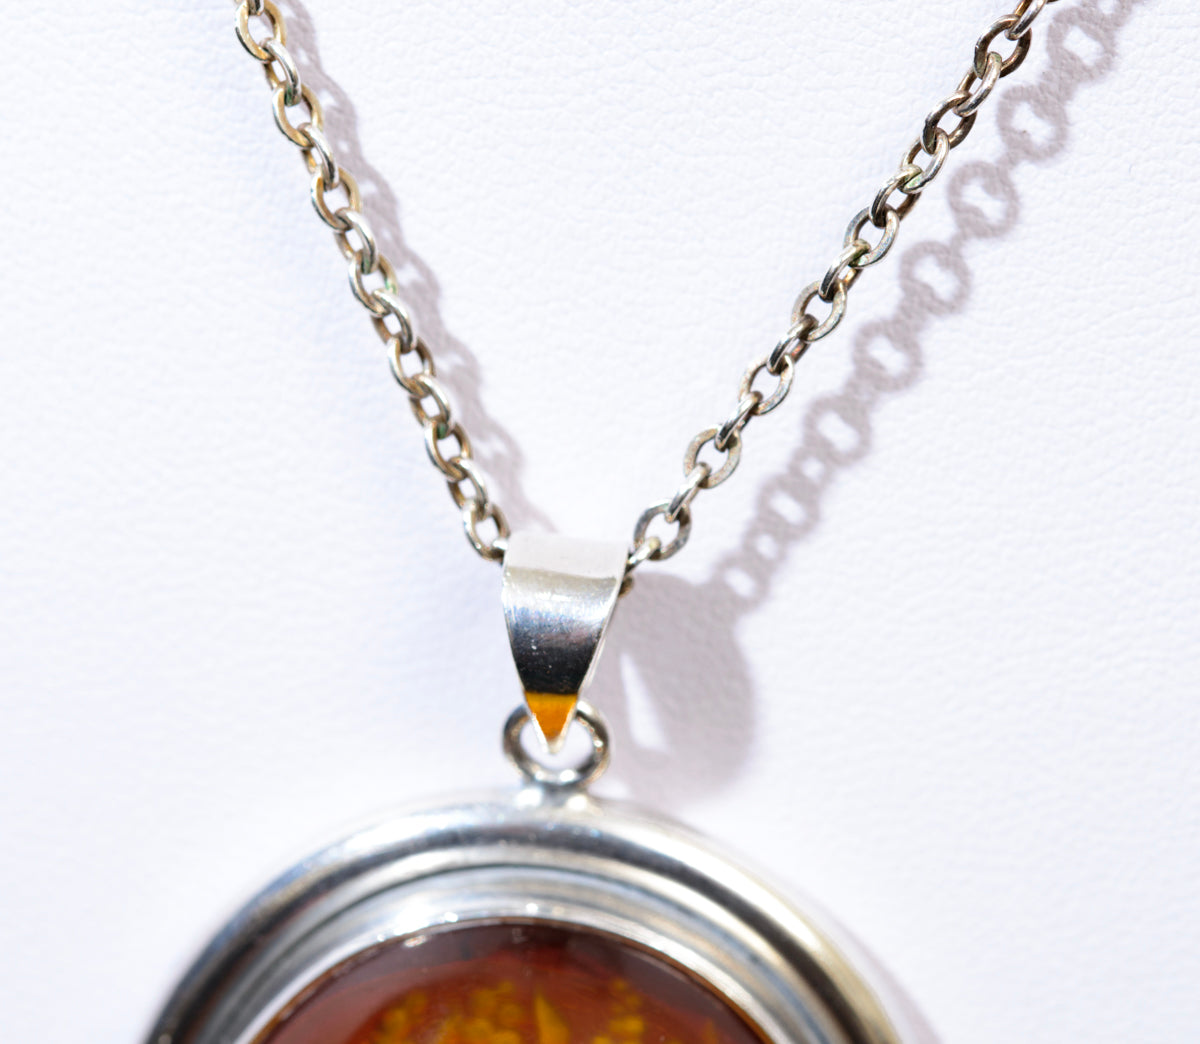 Vintage Sterling Silver Pendant/Necklace With Large Carved Amber Rose Cabochon (A1933)